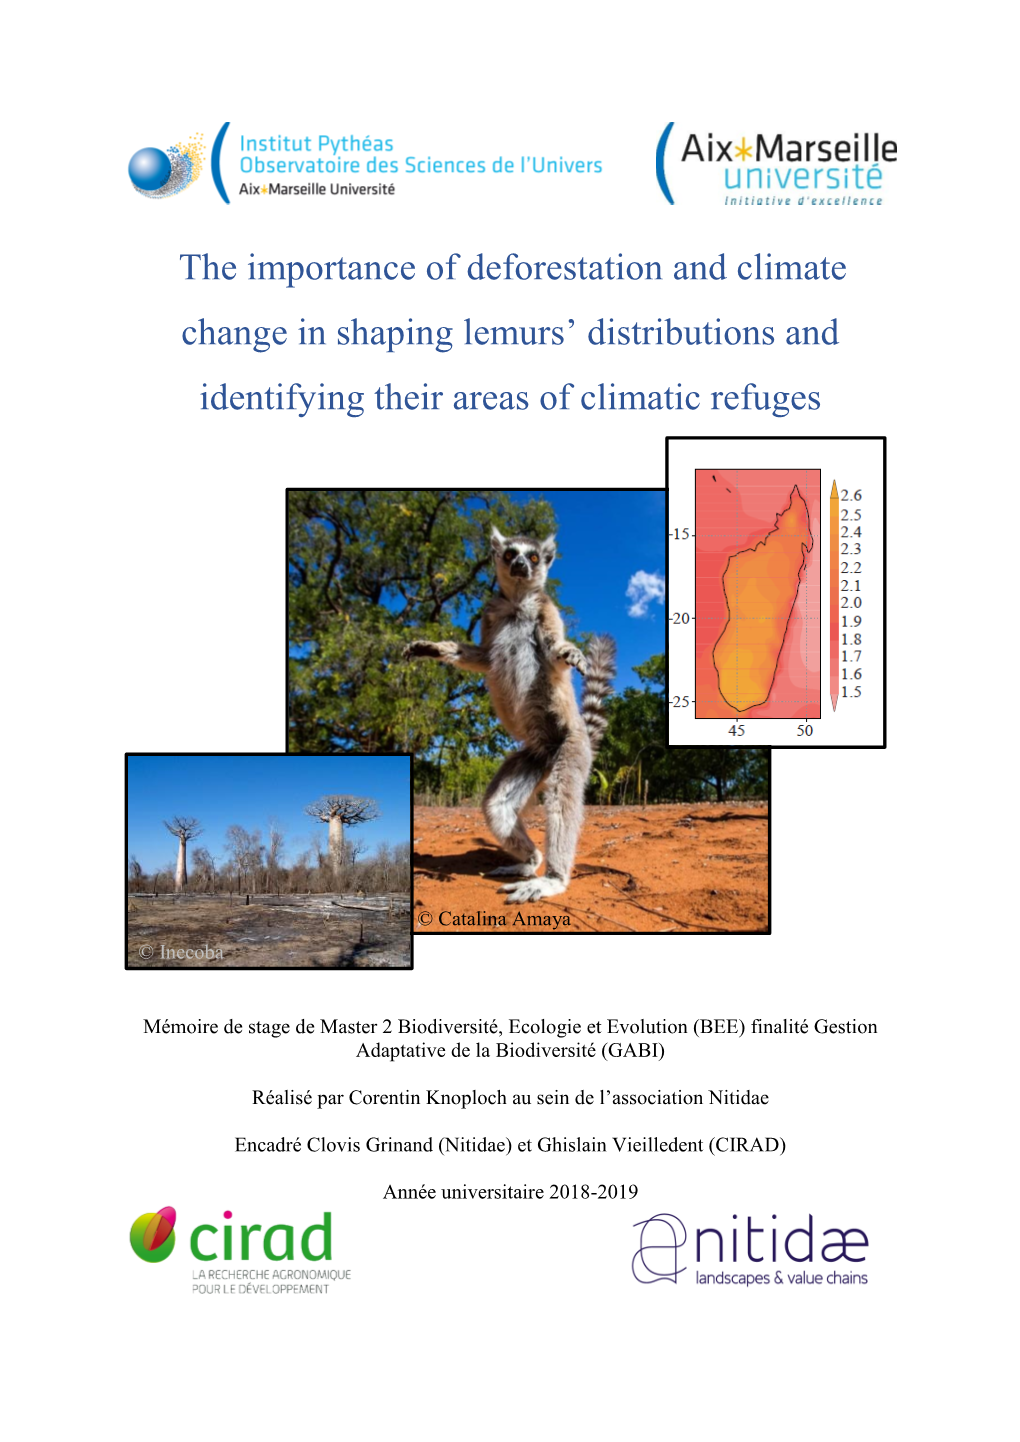 The Importance of Deforestation and Climate Change in Shaping Lemurs’ Distributions and Identifying Their Areas of Climatic Refuges